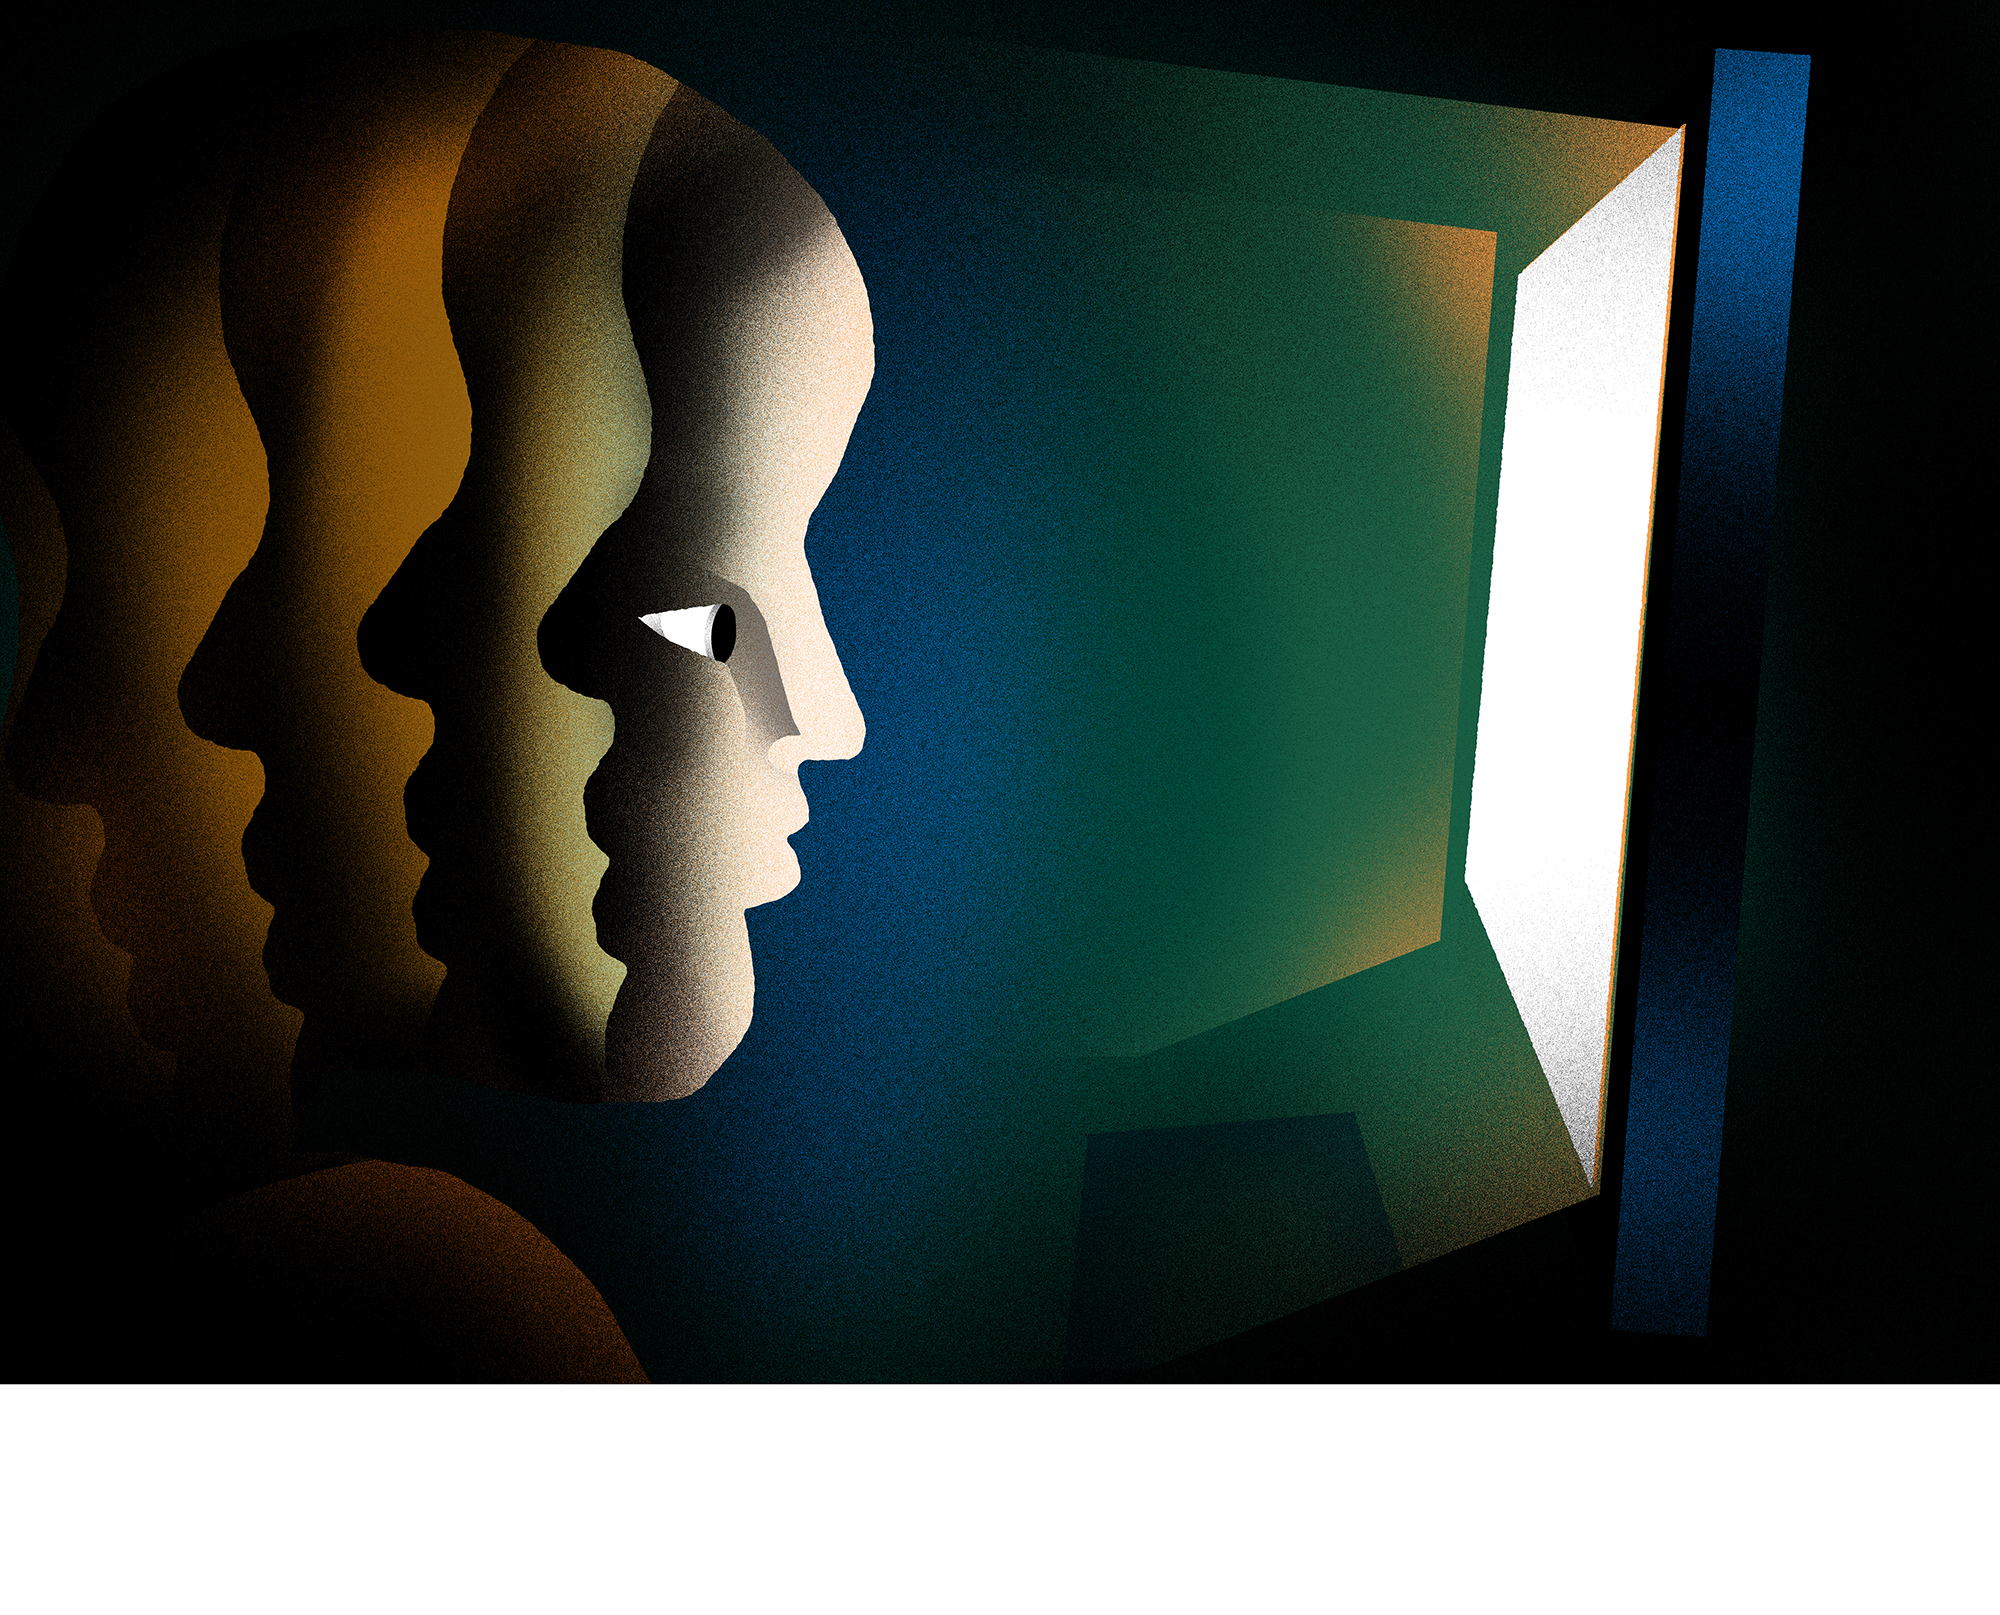 Illustration: A person in shadow looks into a bright computer screen. The mood is ominous.